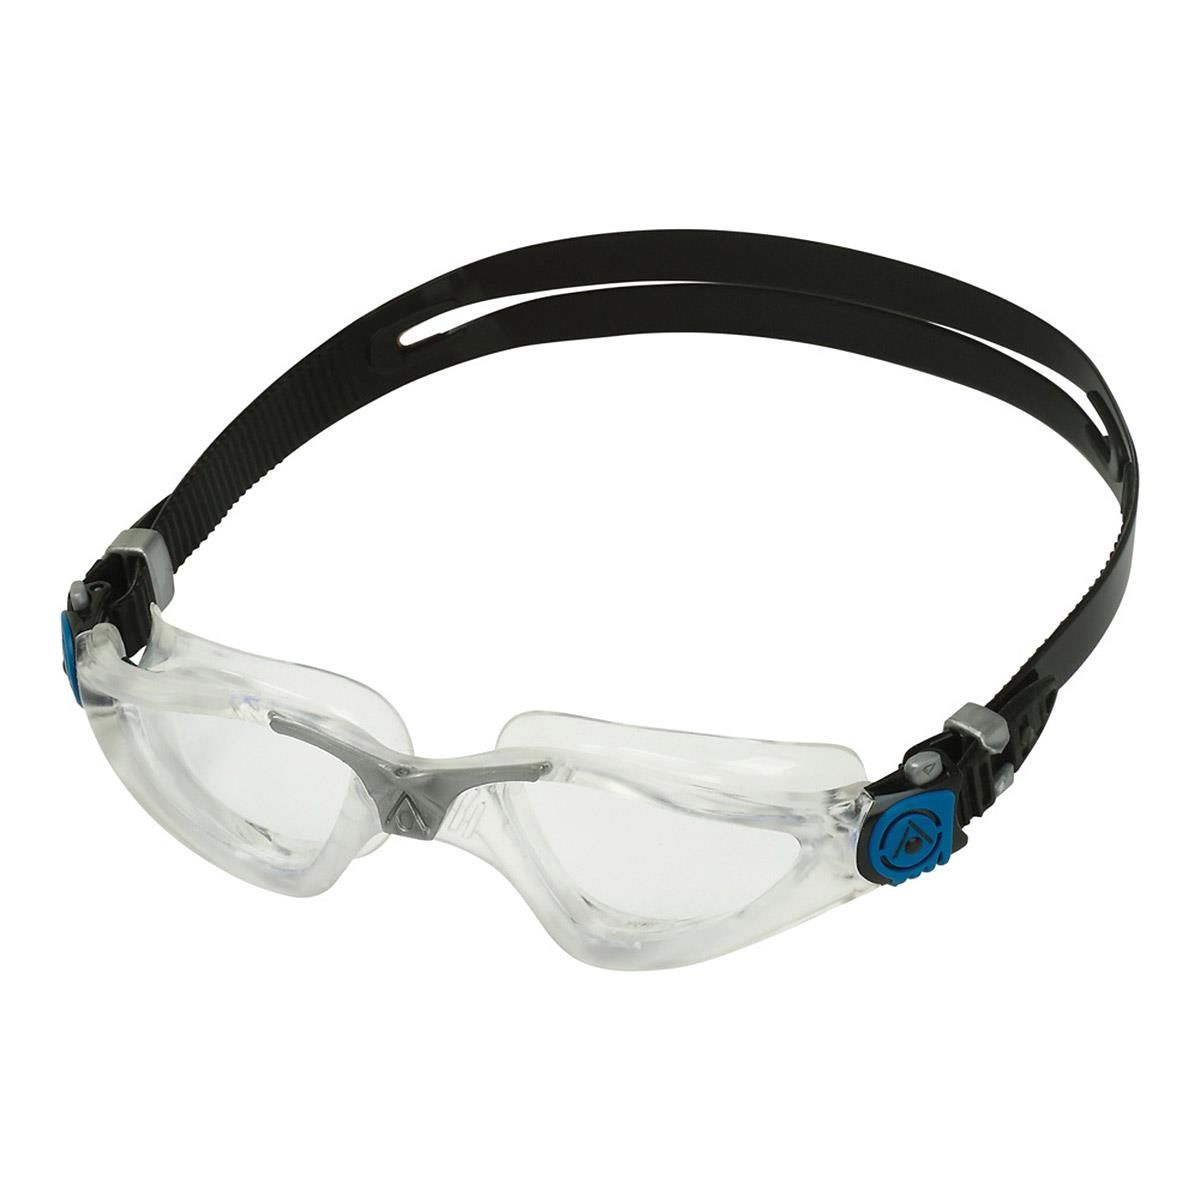 Aqua Sphere Kayenne Goggle With Clear Lens 2019 